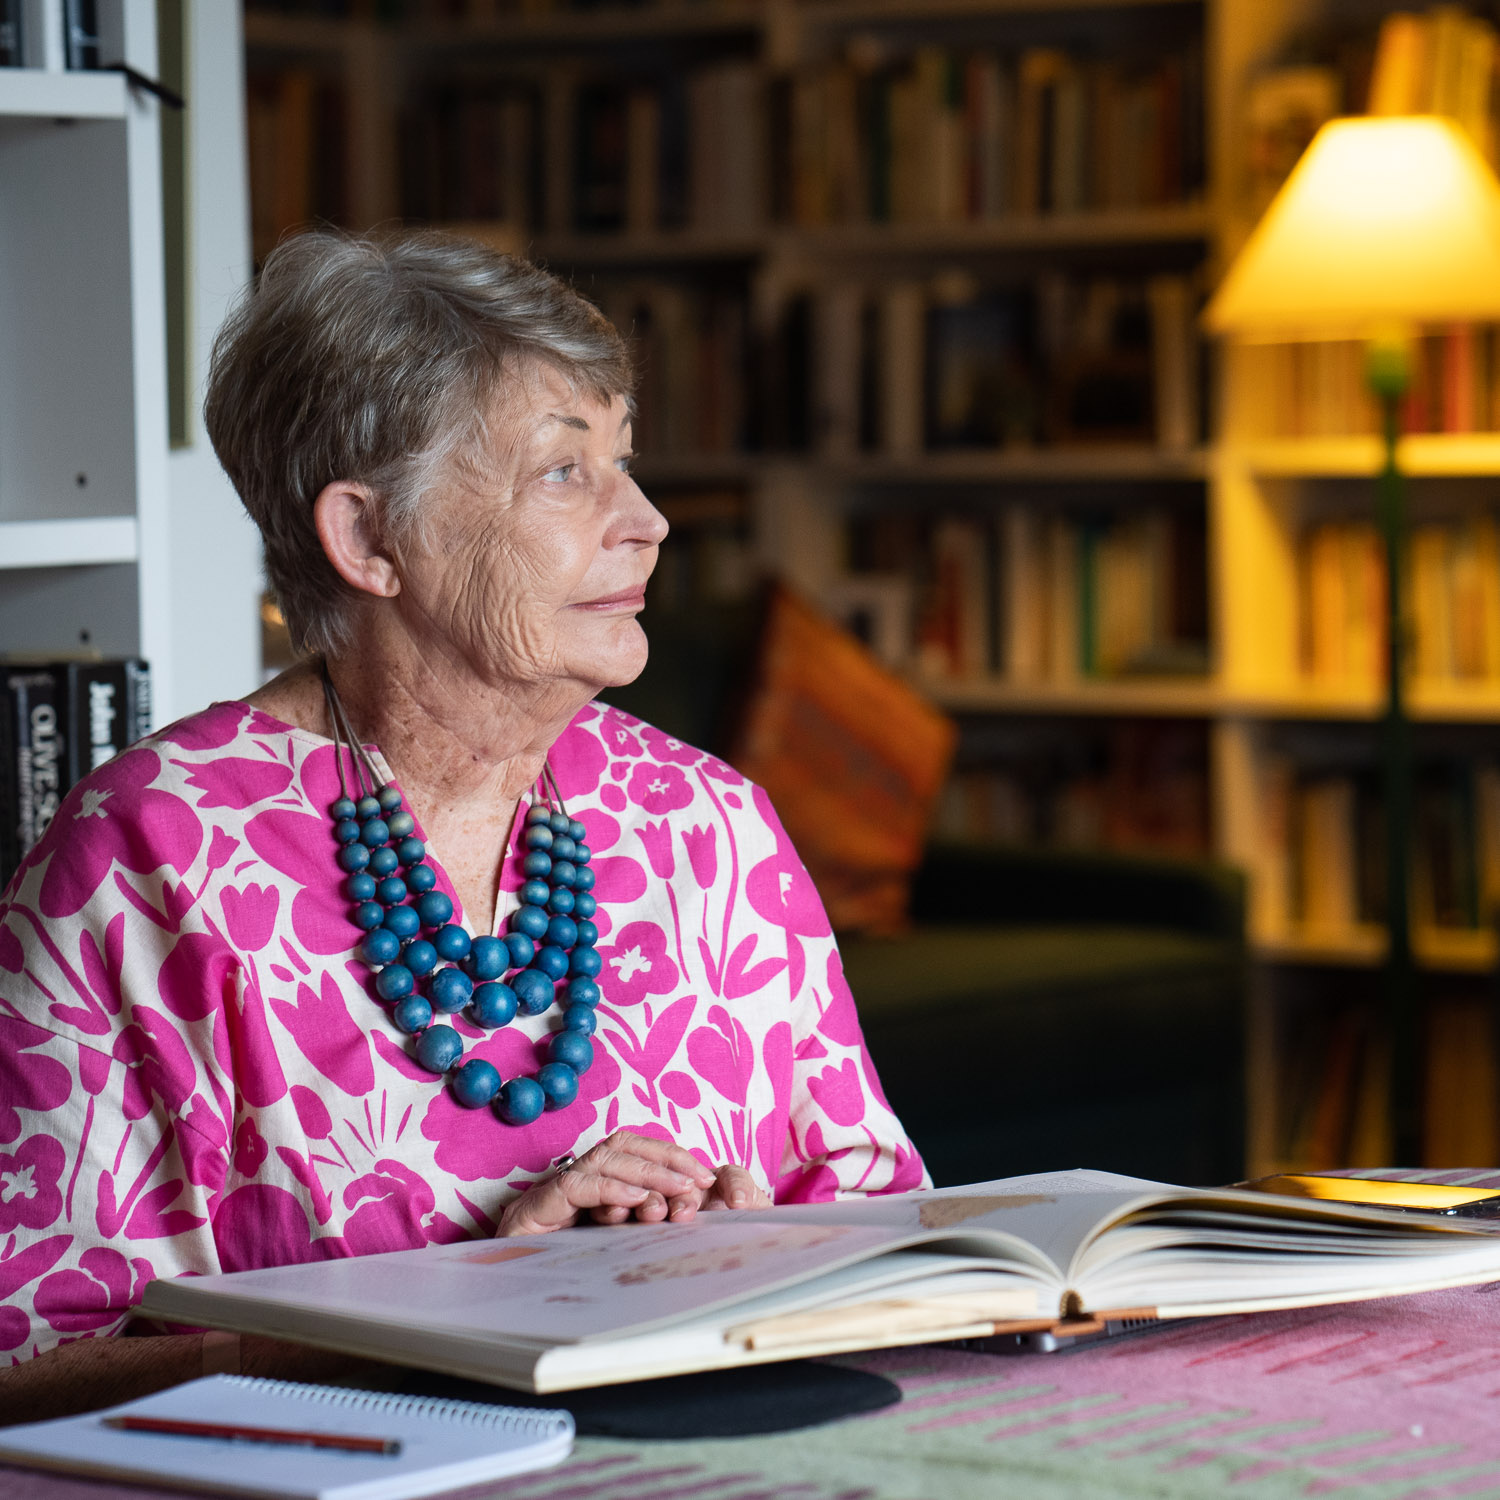 portrait of Professor Lyndall Ryan in her home studying a book^empty:{ds__assetid^as_asset:asset_name}